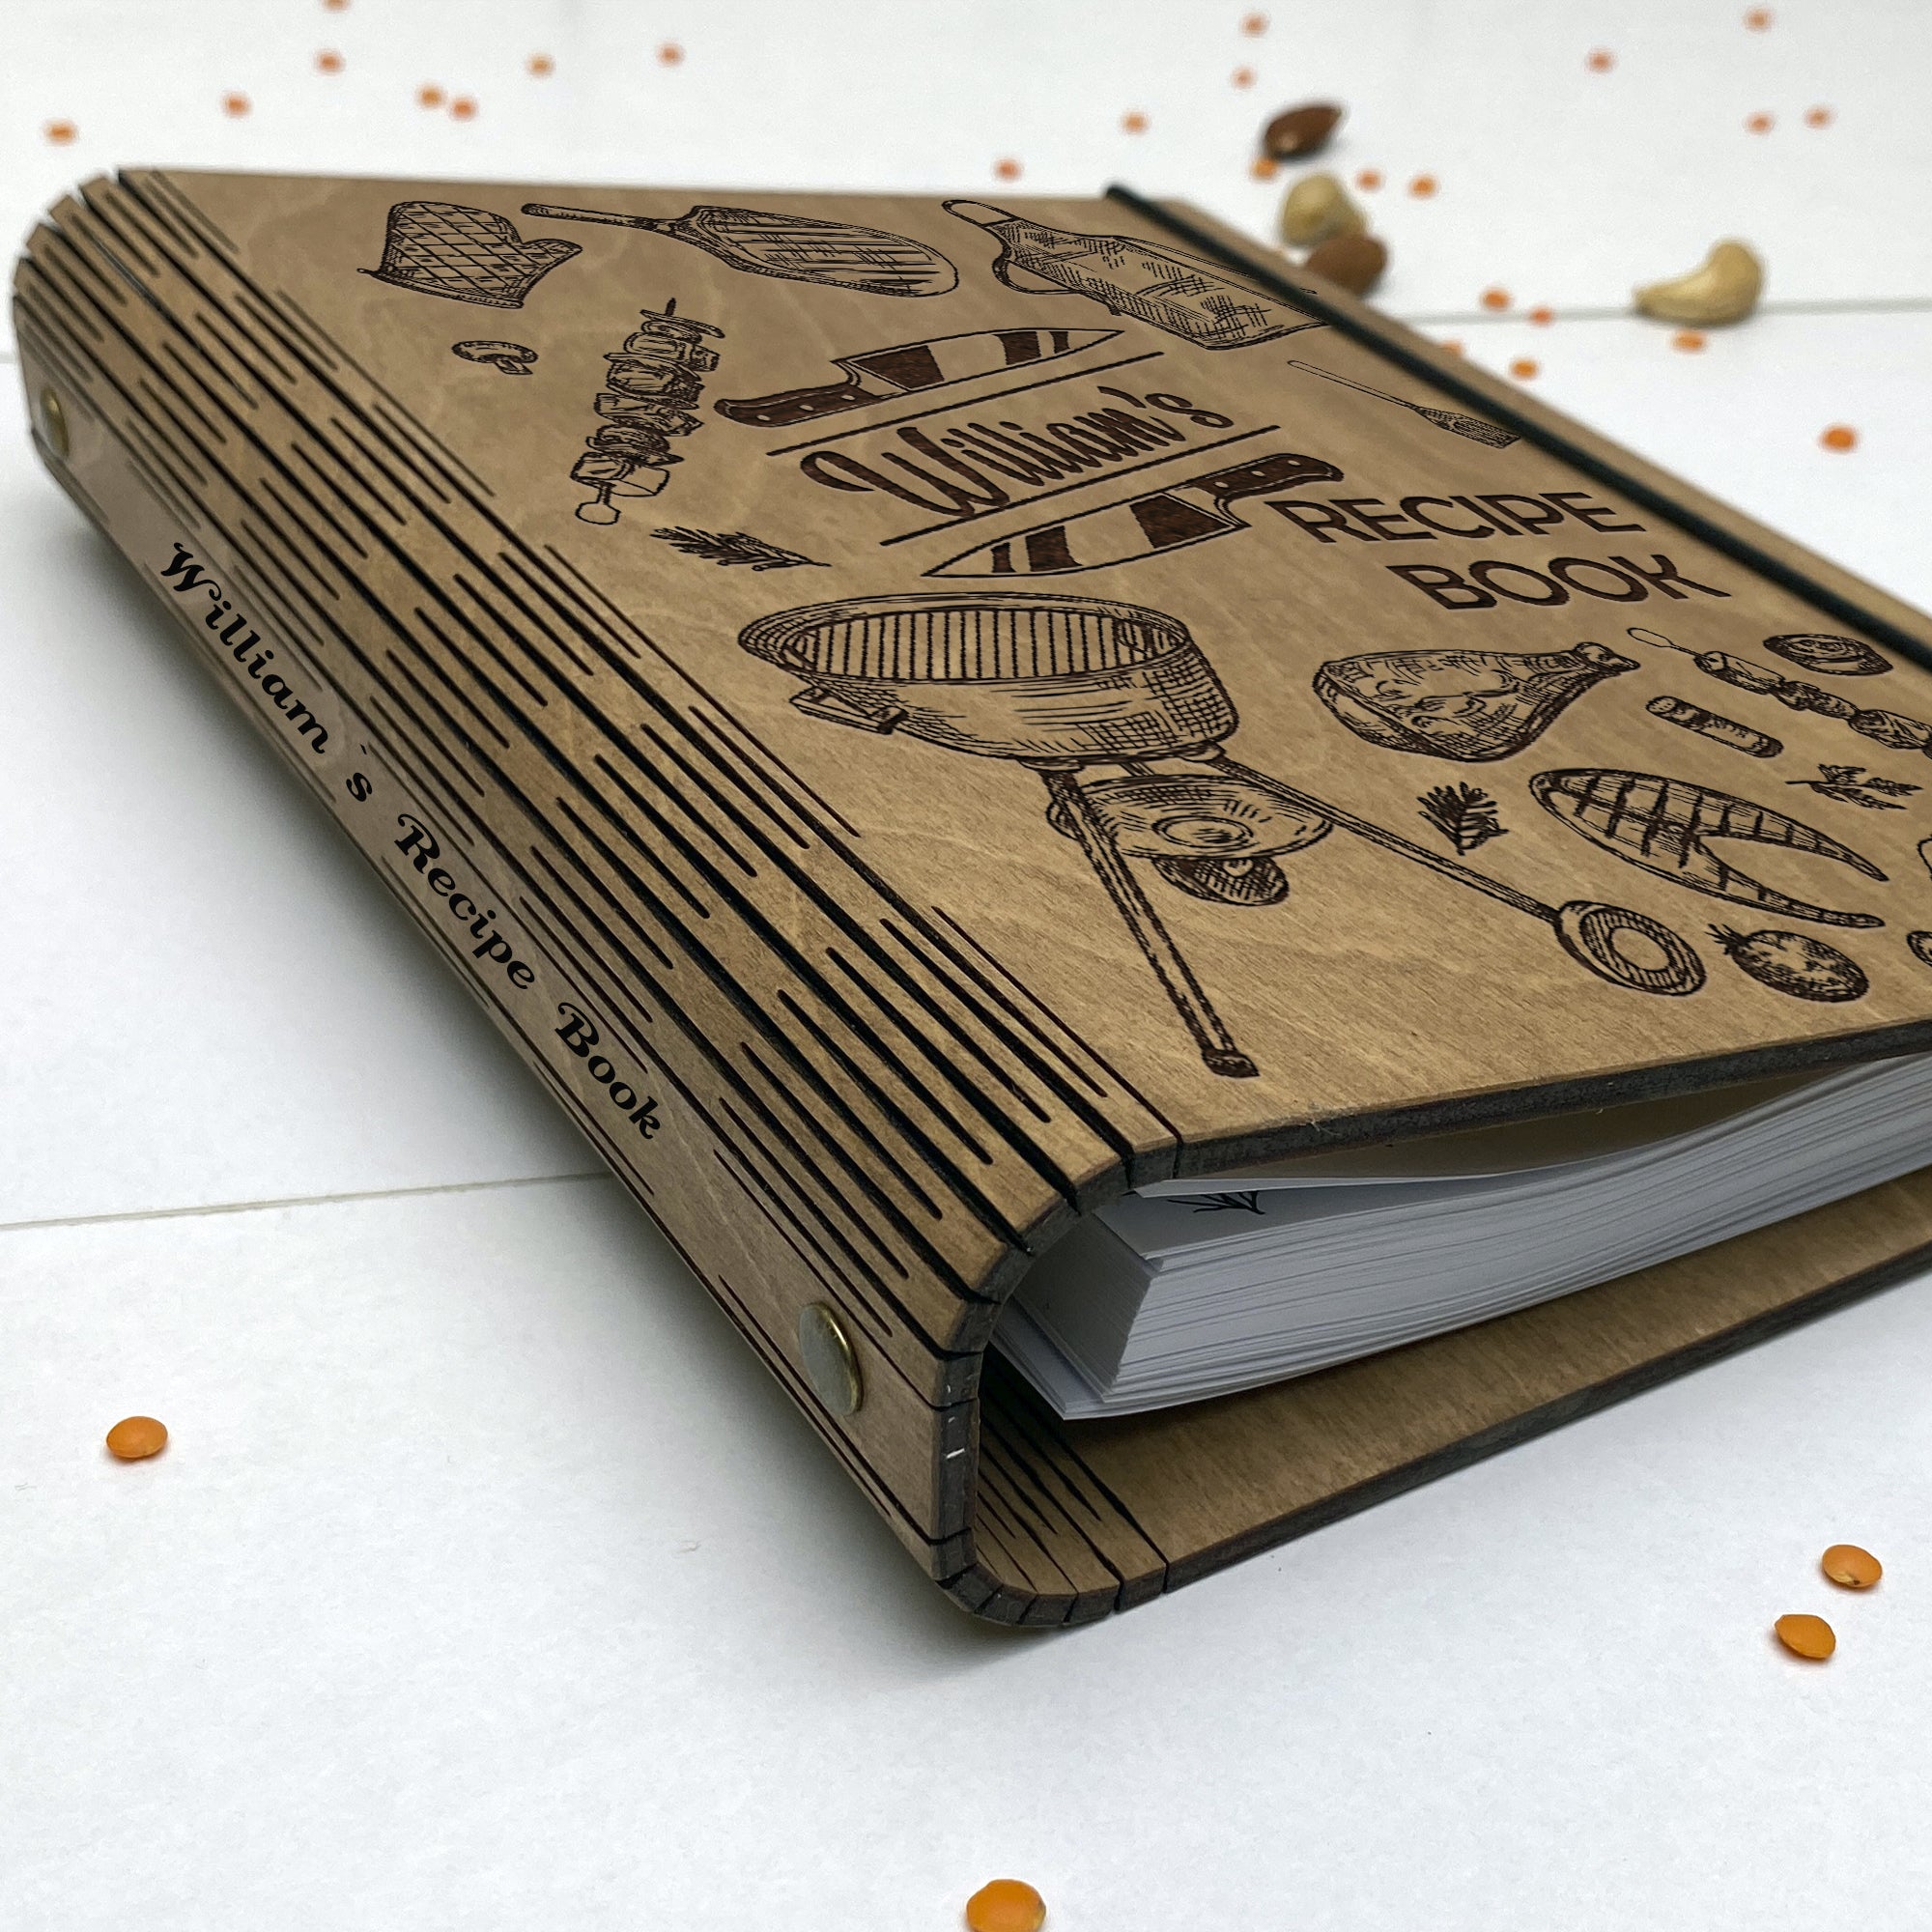 Barbecue Book Free custom engraving